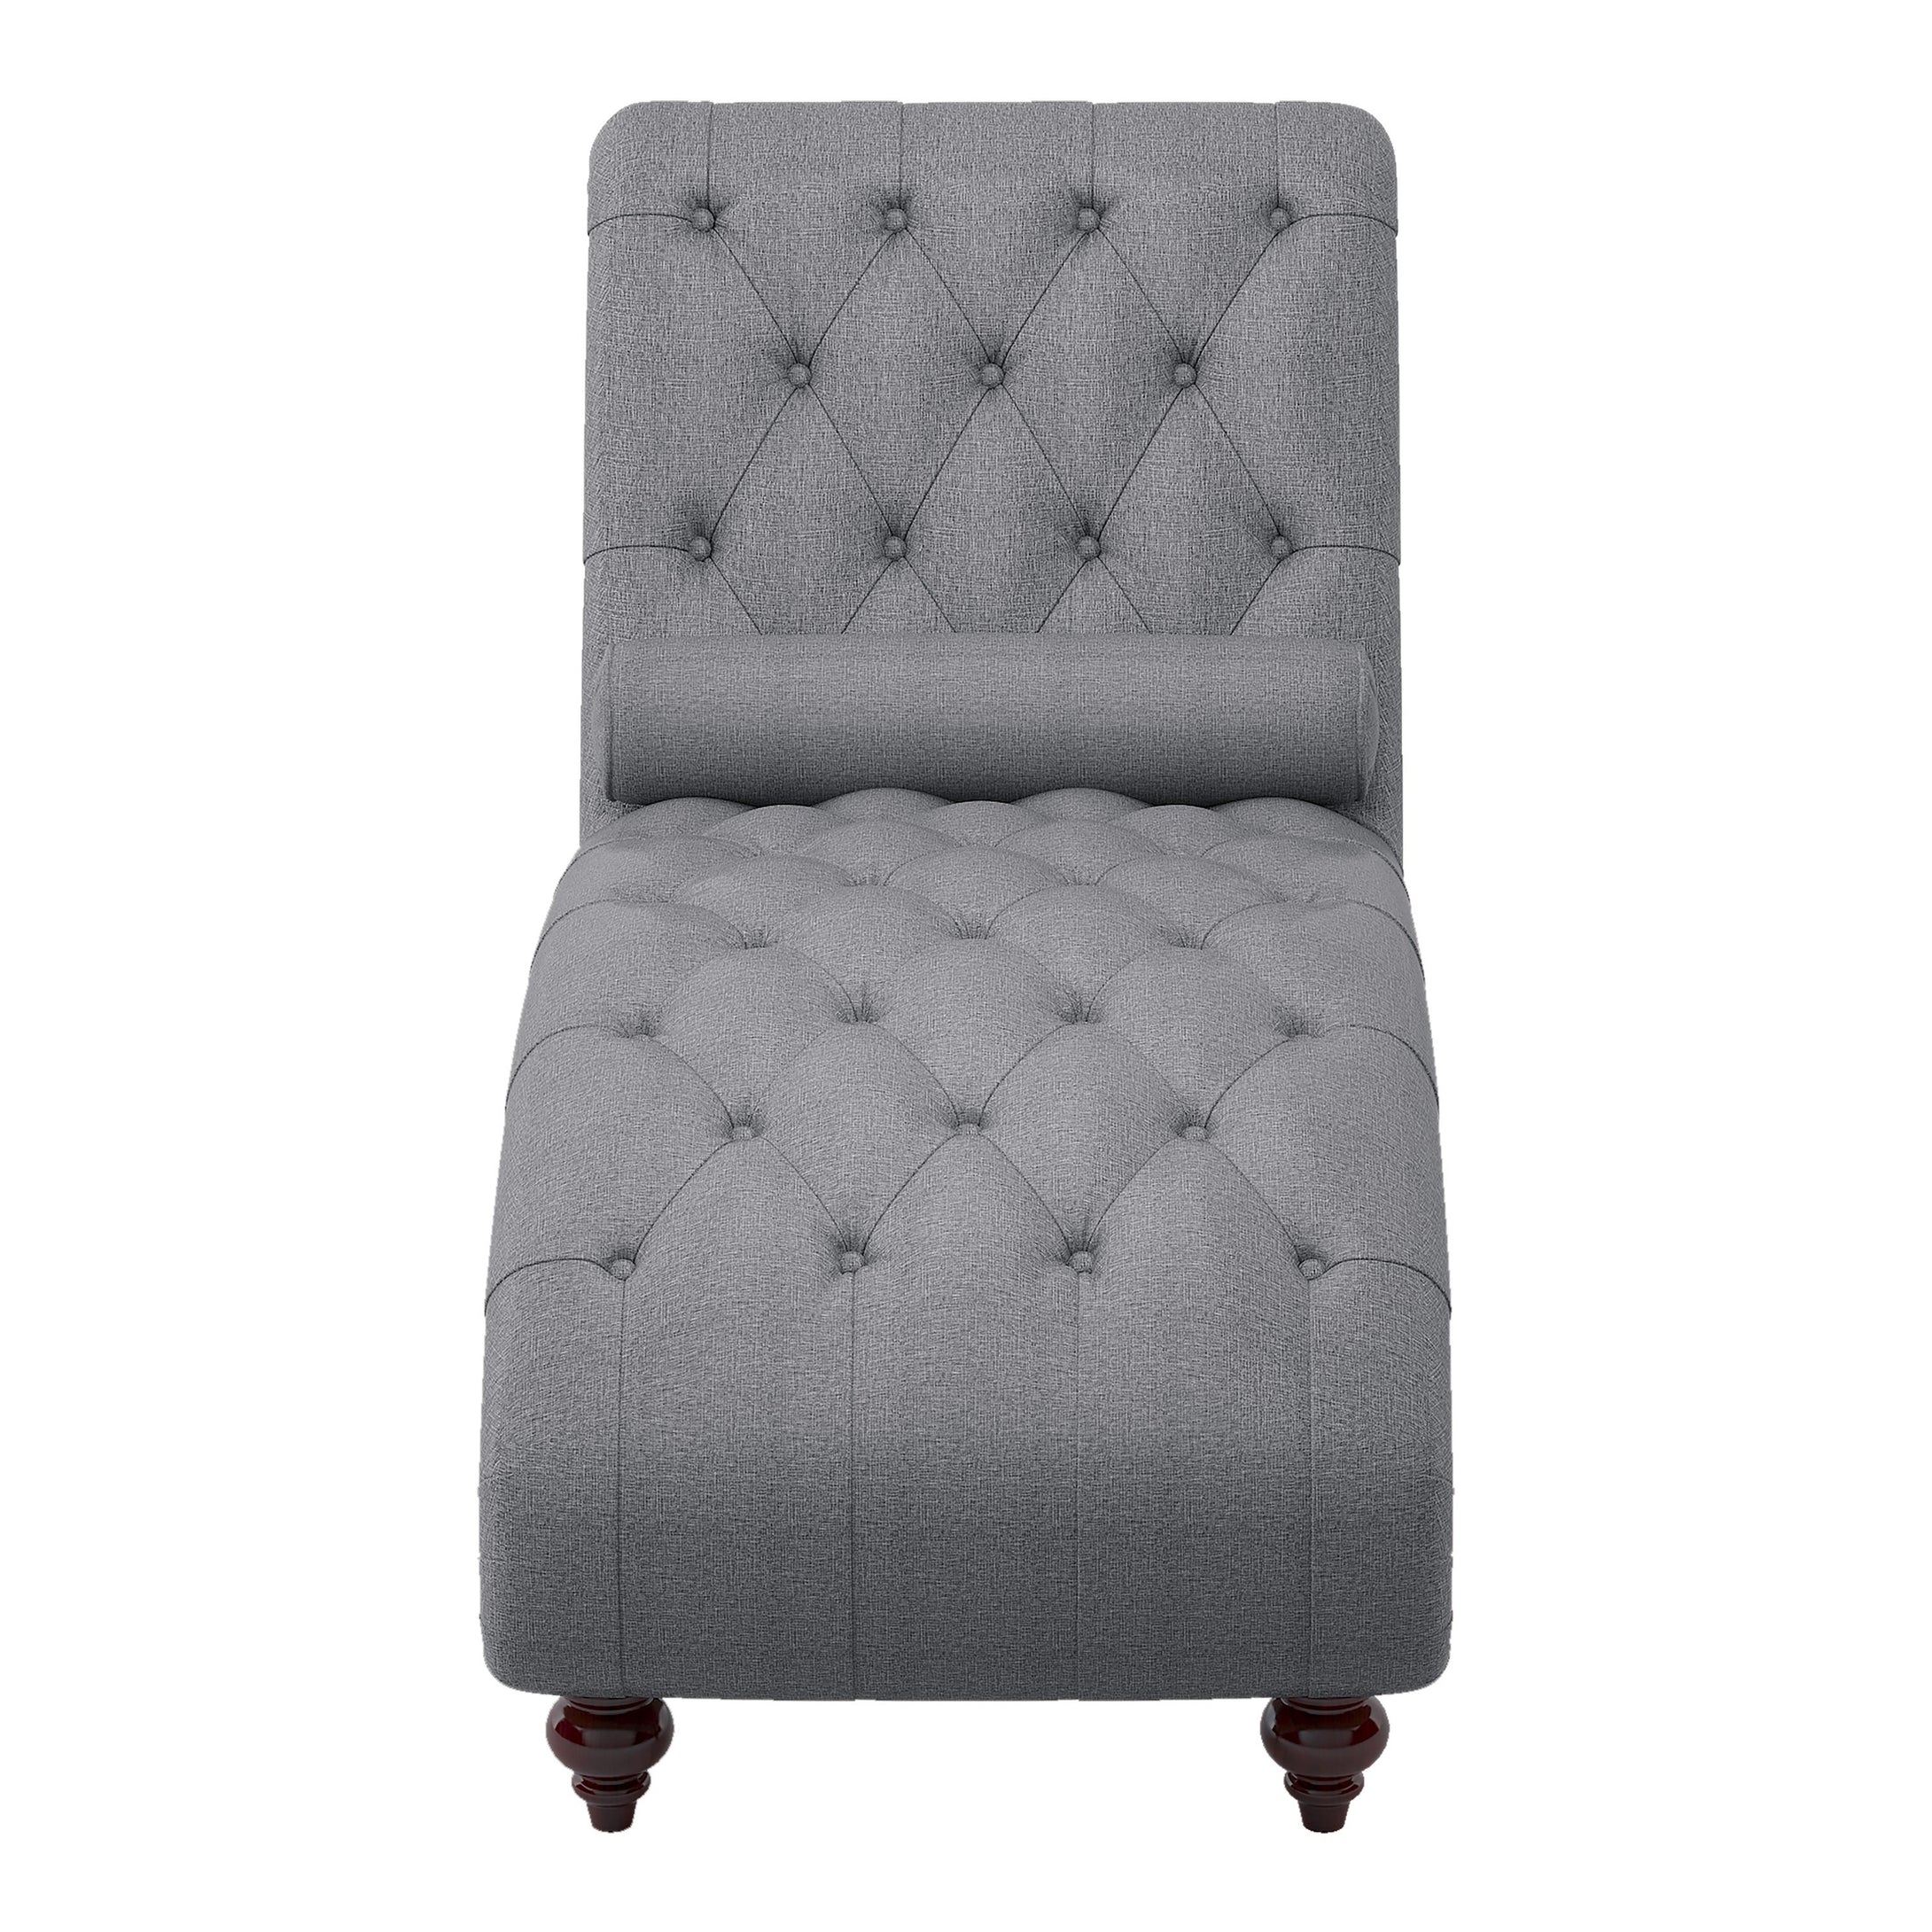 1162GY-5 Chaise with Nailhead and Pillow